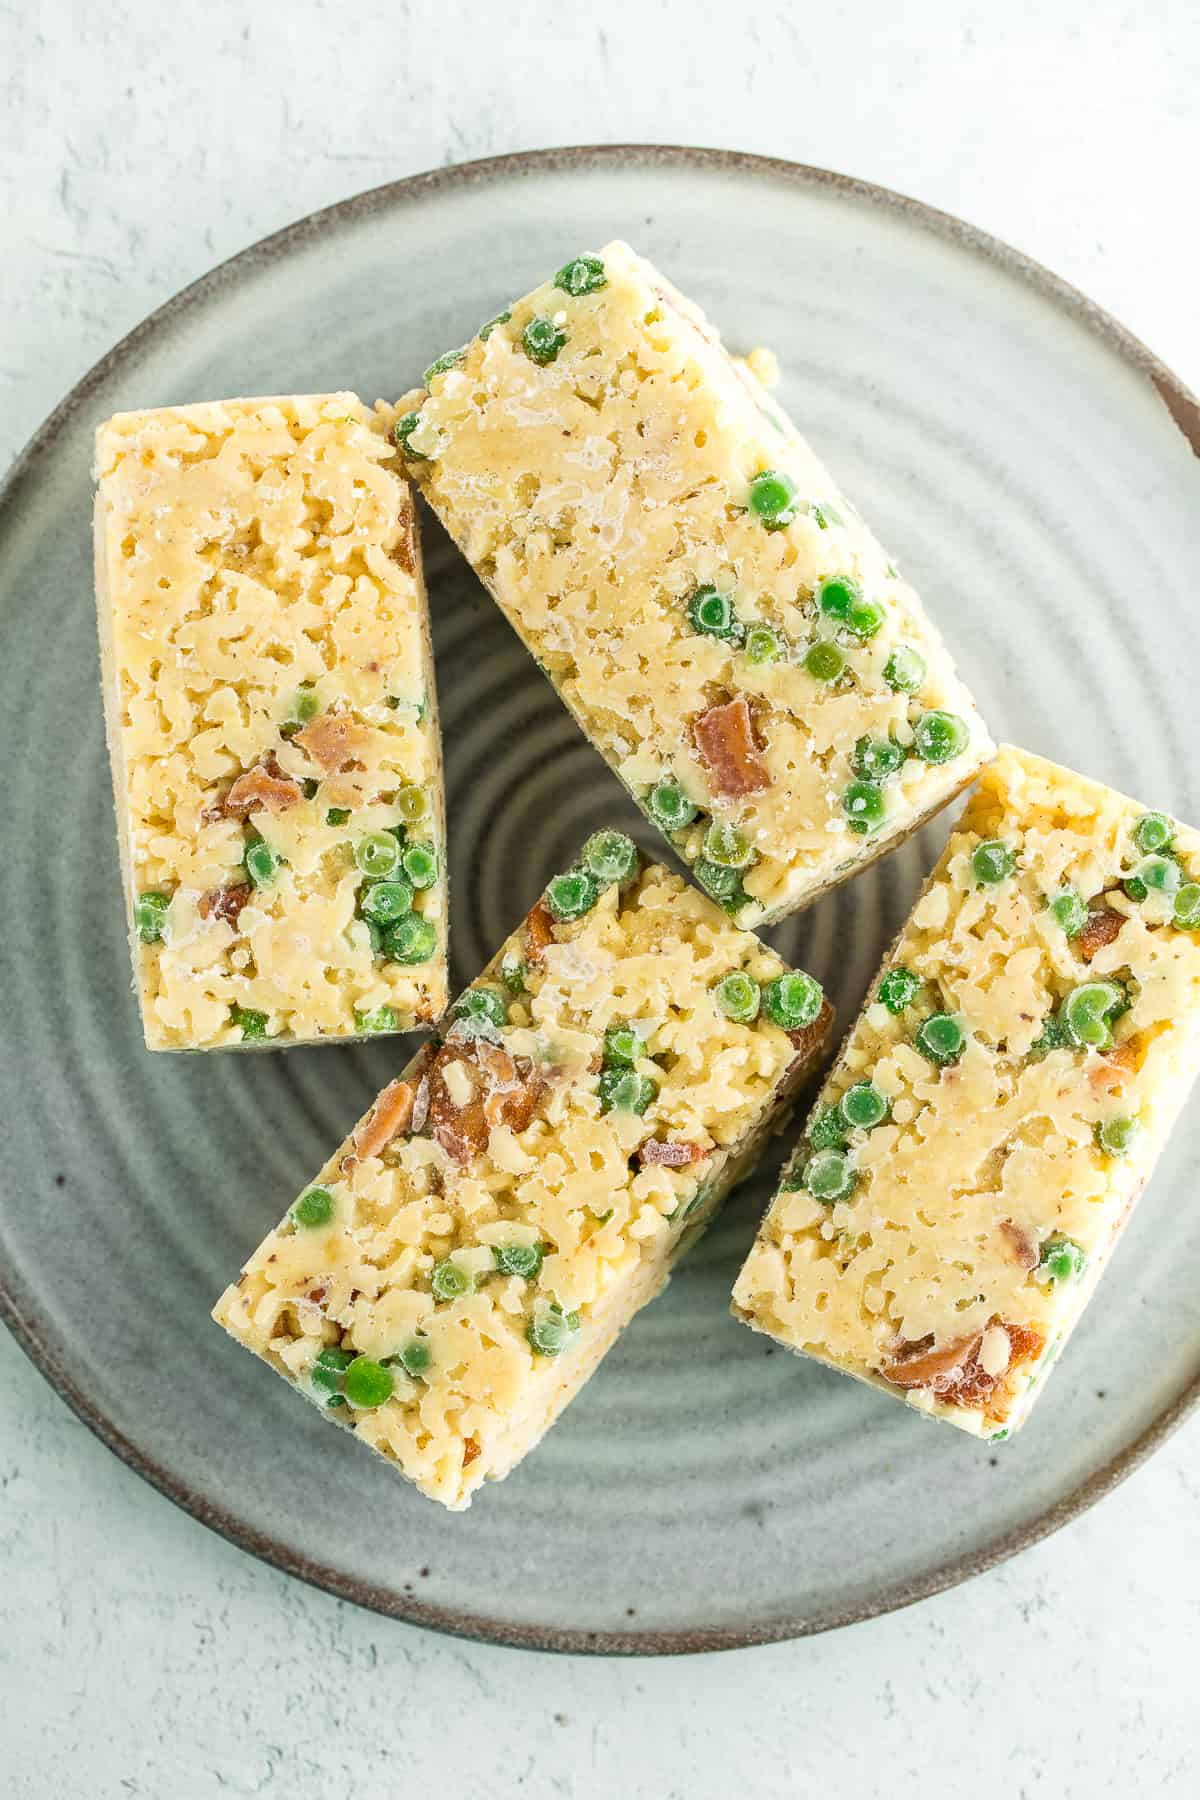 Frozen cubes of bacon and pea risotto on a grey plate.